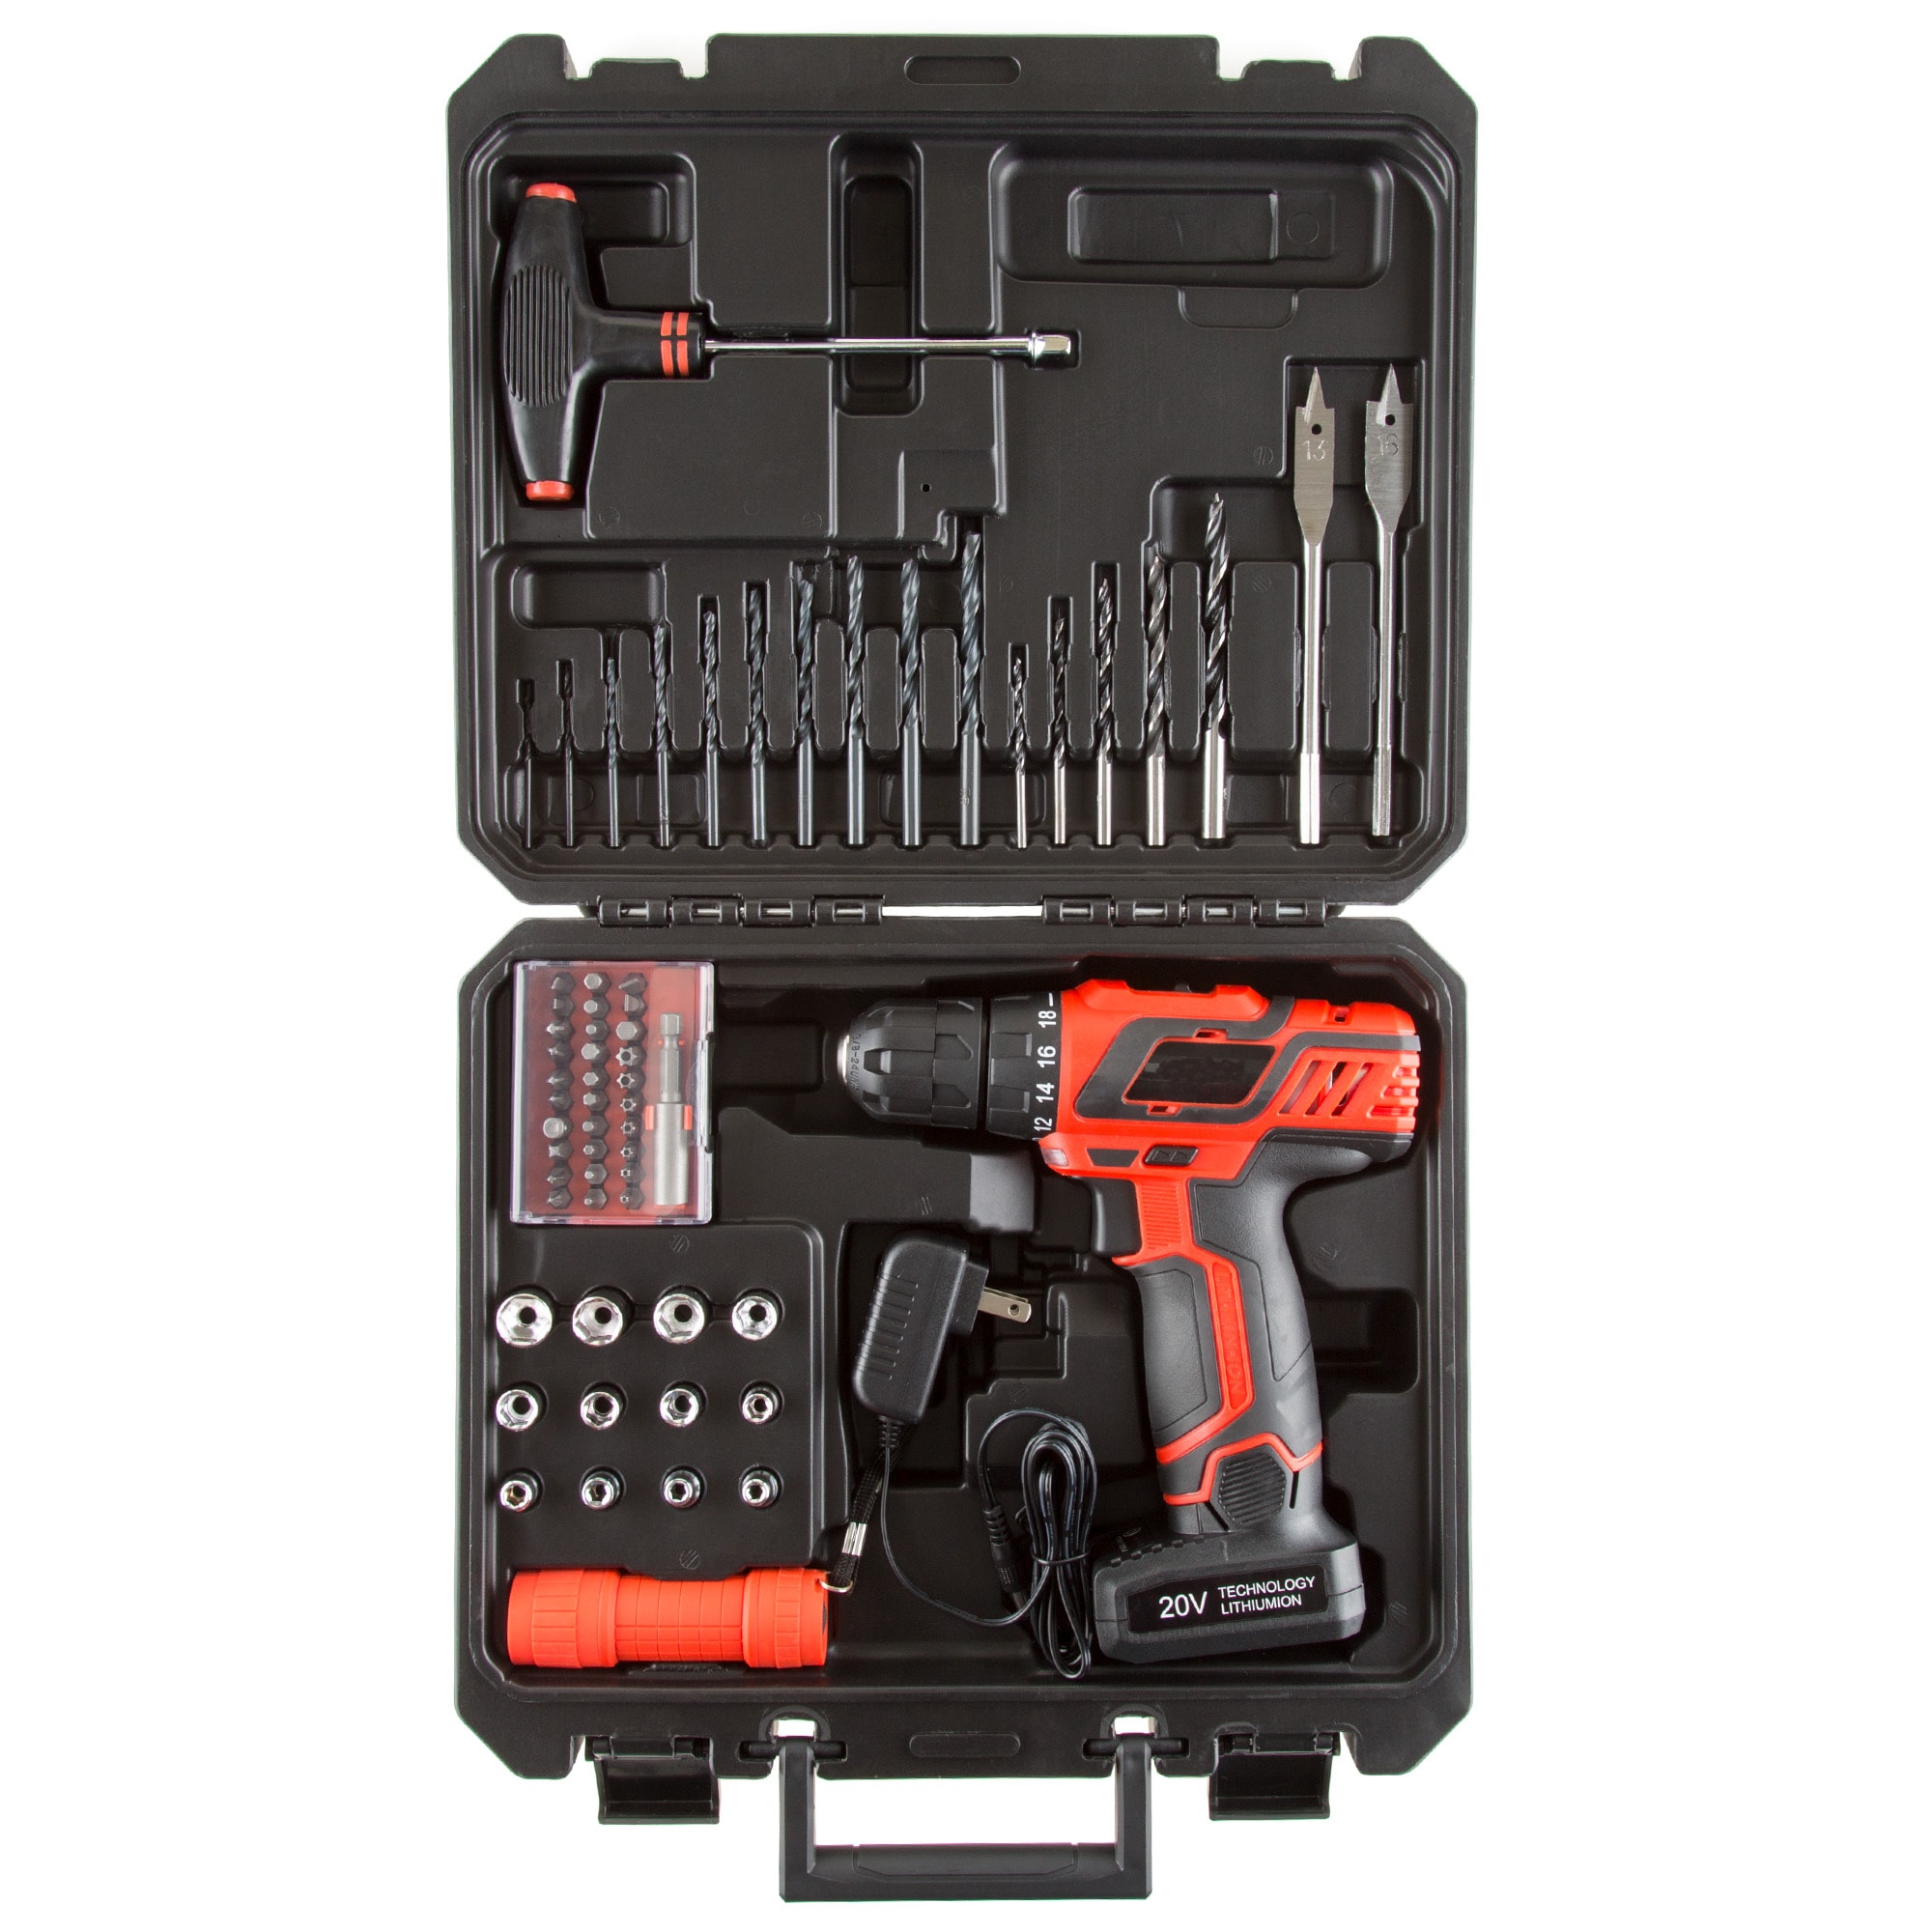 Fleming Supply Cordless drill set 20-volt 3/8-in Cordless Drill (1 Li-ion Battery Included and Charger Included)